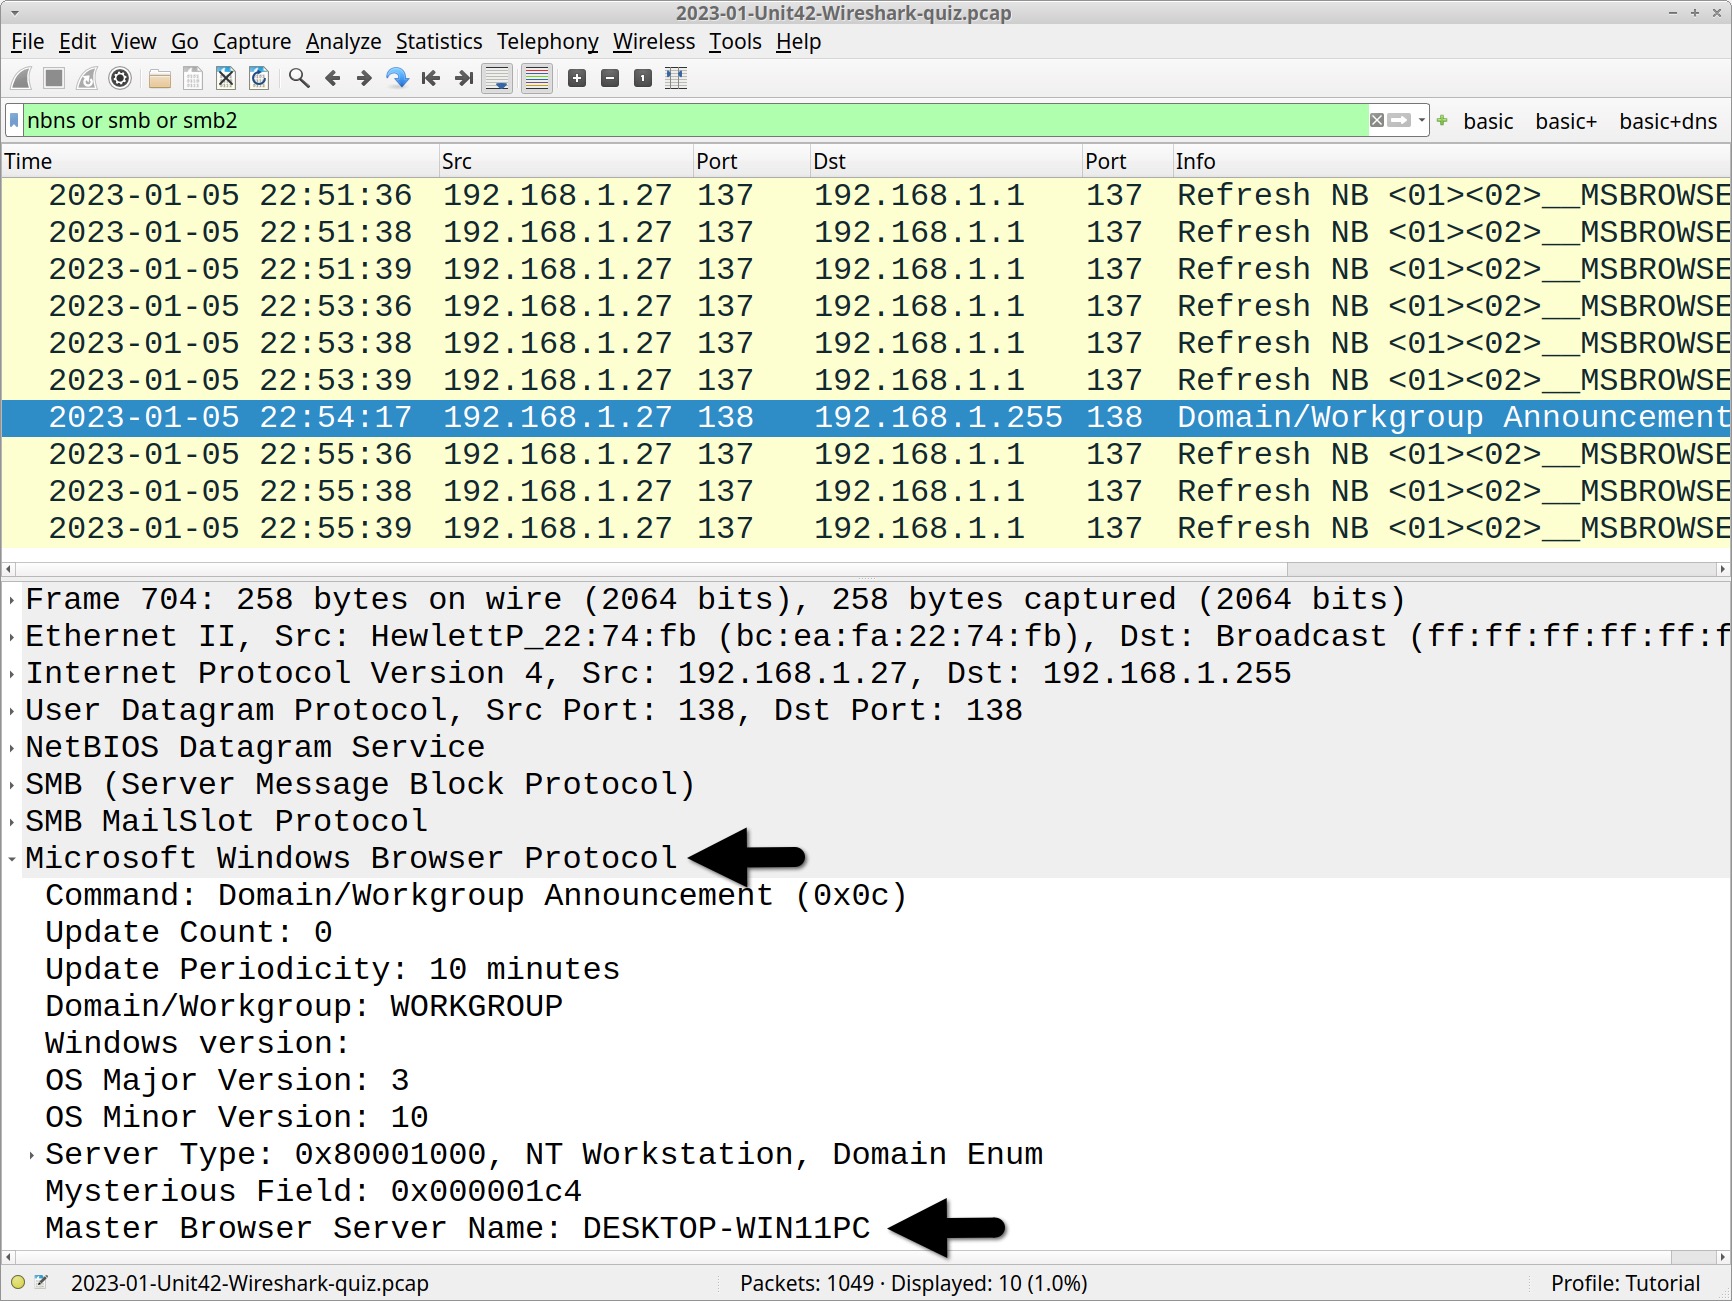 Image 4 is a screenshot of the Wireshark program. This shows the SMB traffic from the cpap. 